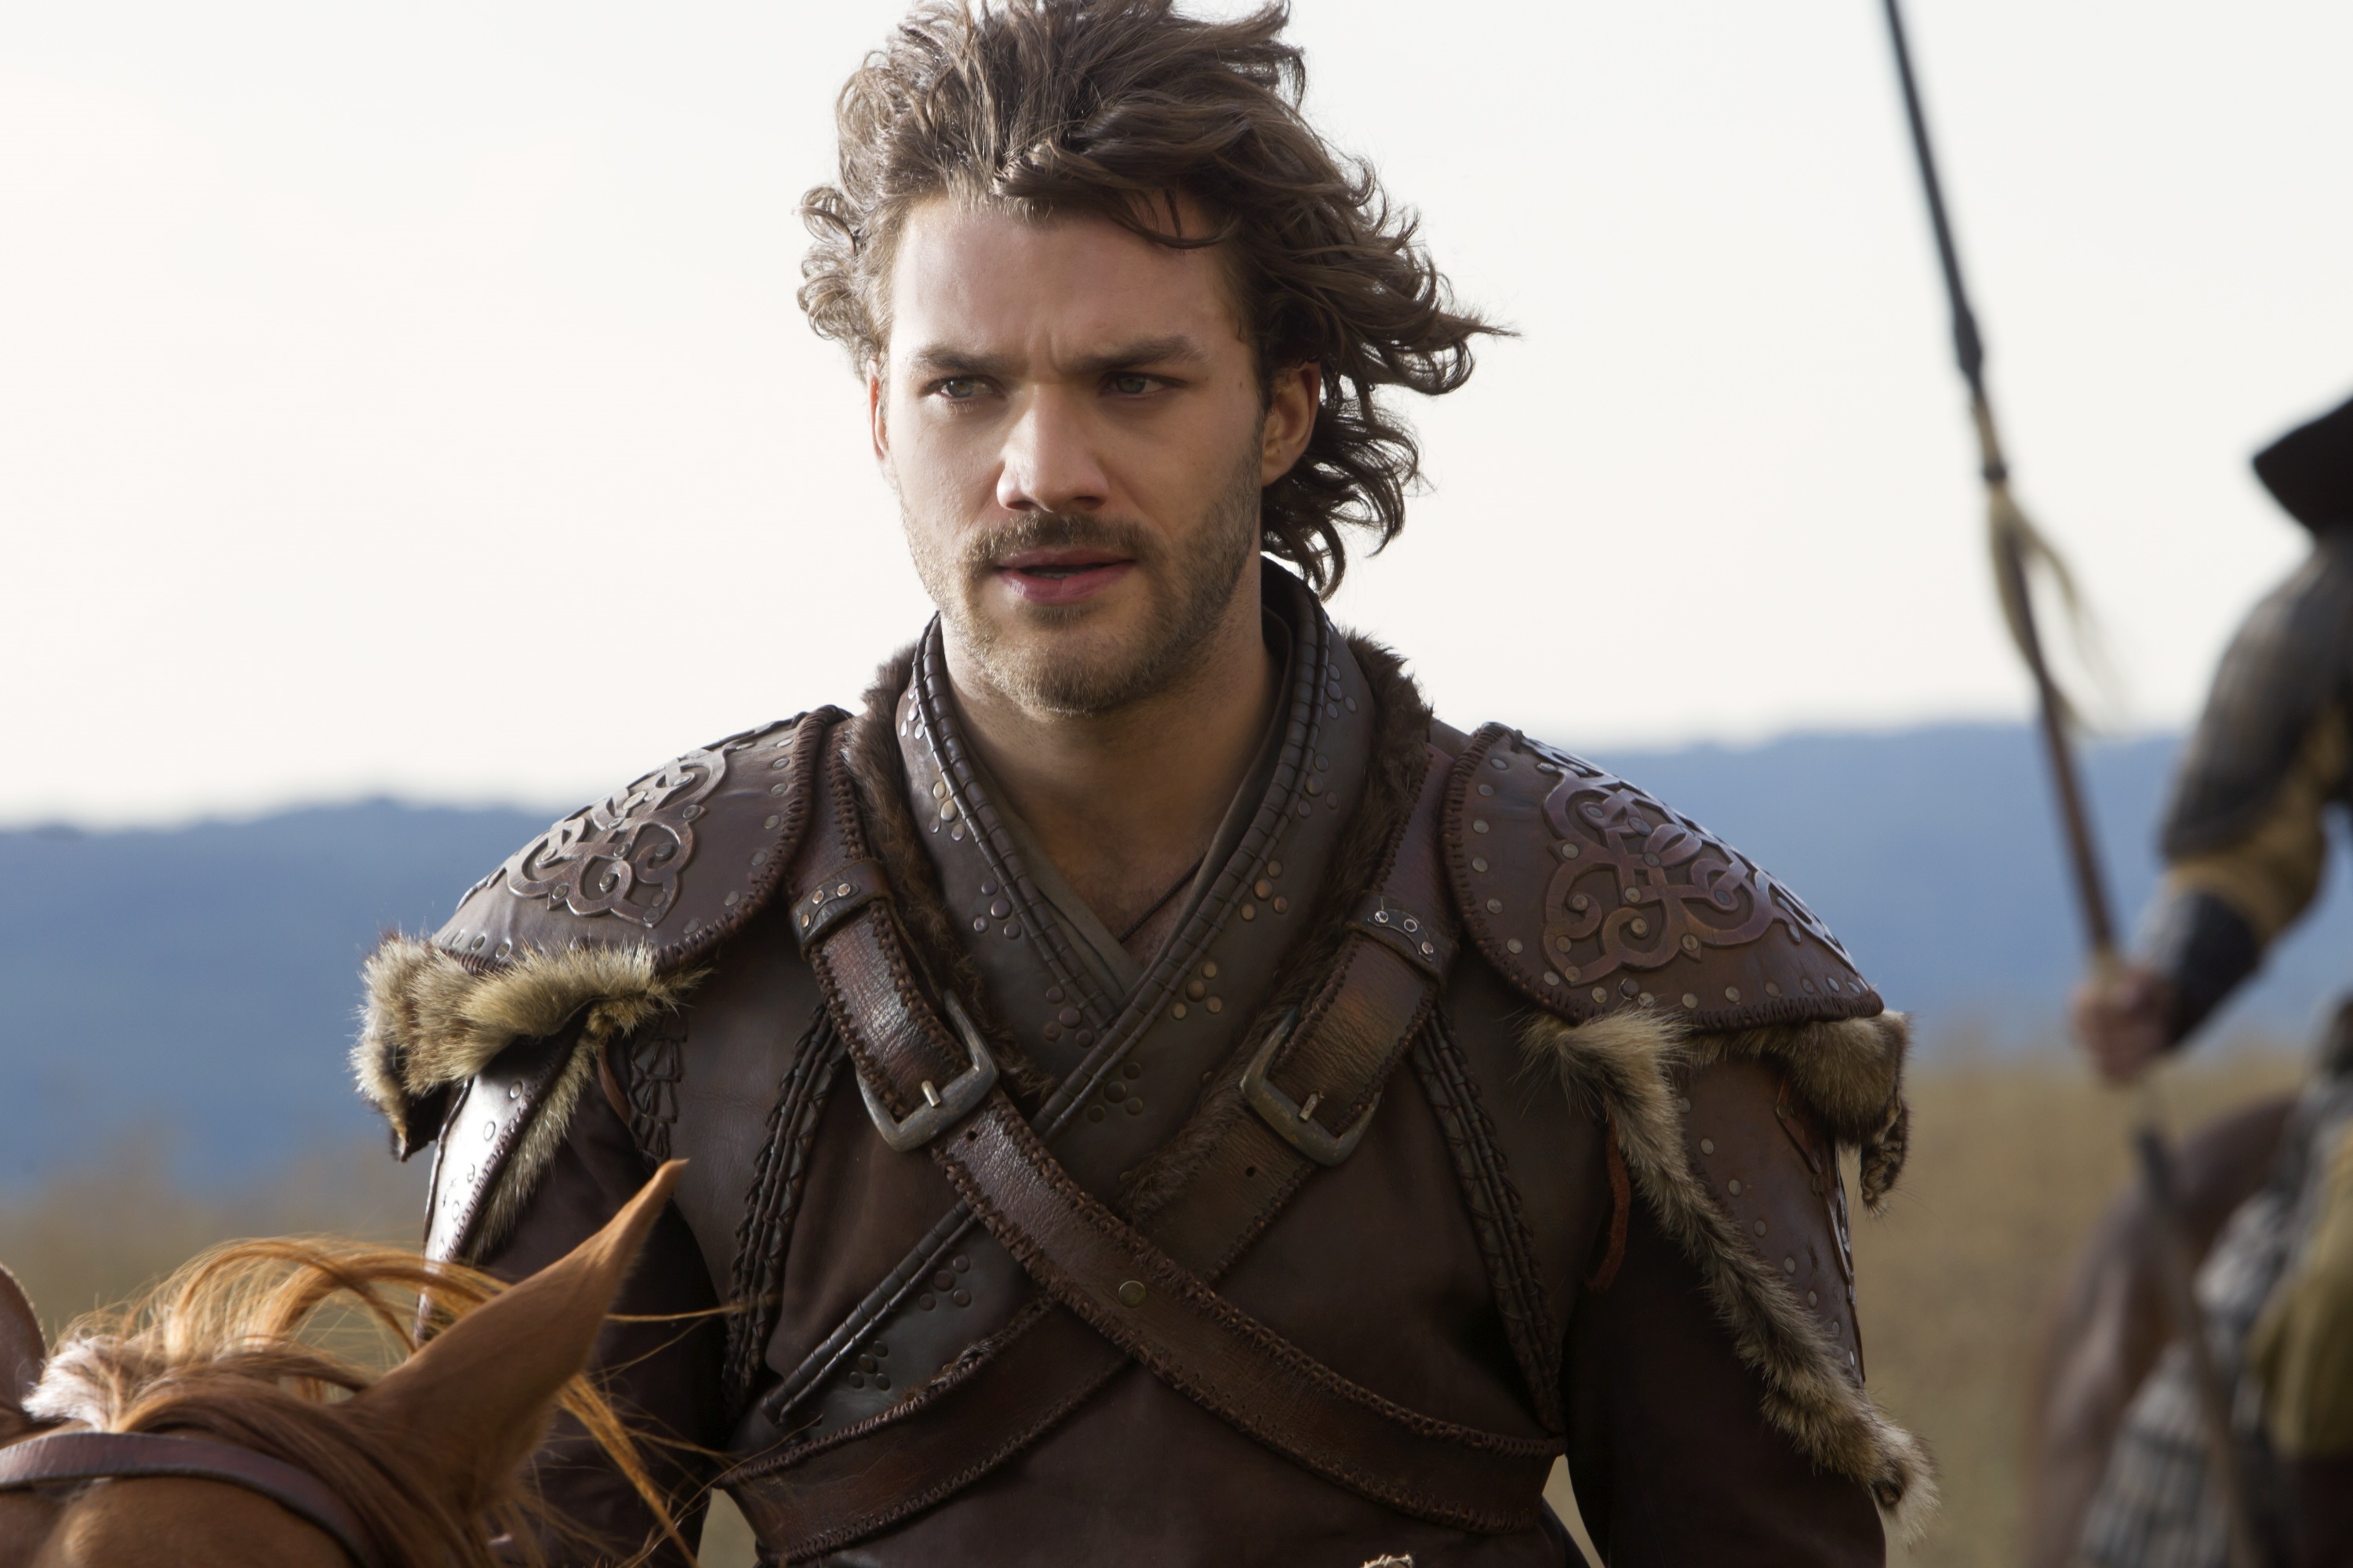 <p>Leave it to Netflix to remind us that "Marco Polo" isn't just a fun game to play in the pool in the summer, but the name of a real explorer. The show ran for two seasons starting in 2014 and focused on the time Marco (played by Lorenzo Richelmy) spent in Mongolia in the court of the great warrior Kublai Khan in the late 13th century.</p>